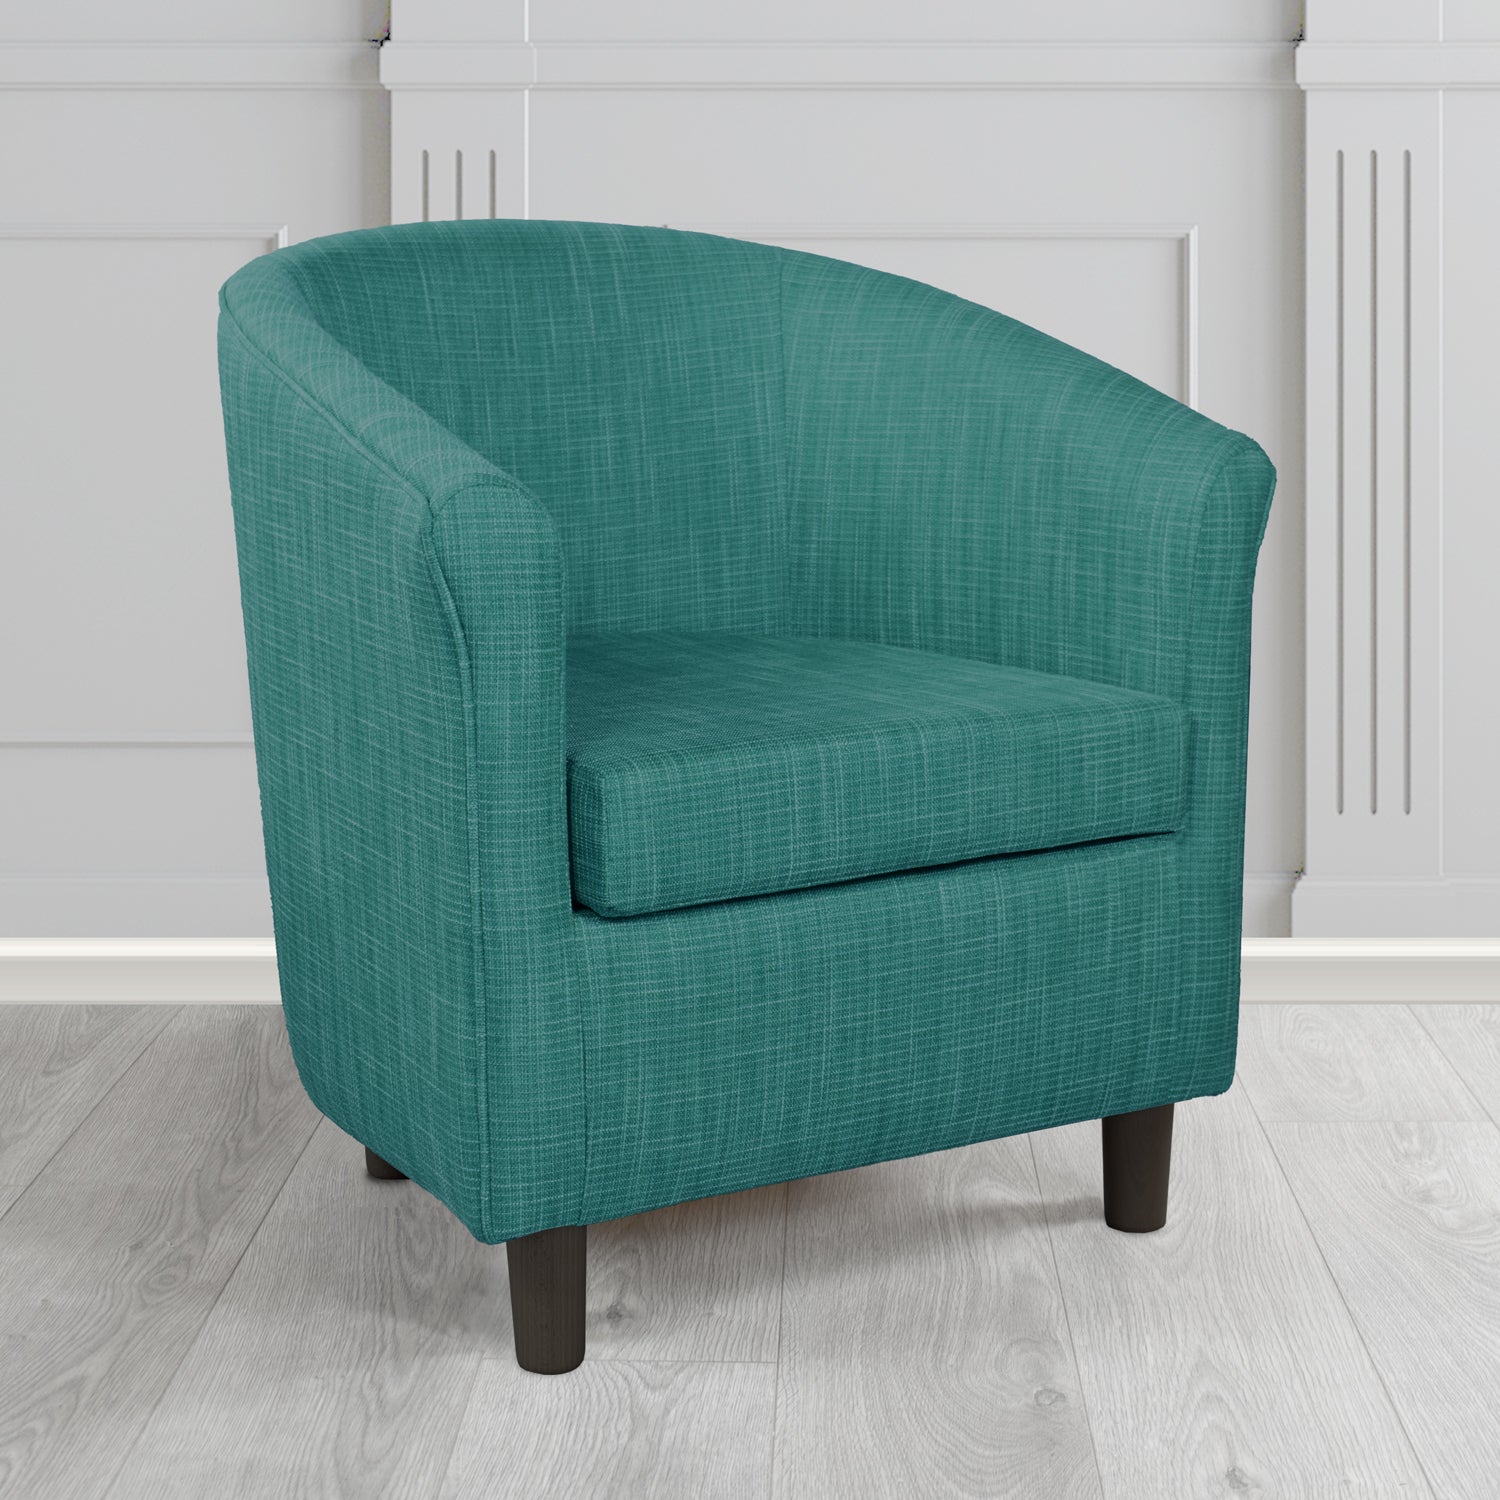 Tuscany Ravel Kingfisher Contract Crib 5 Fabric Tub Chair - Antimicrobial & Water-Resistant - The Tub Chair Shop